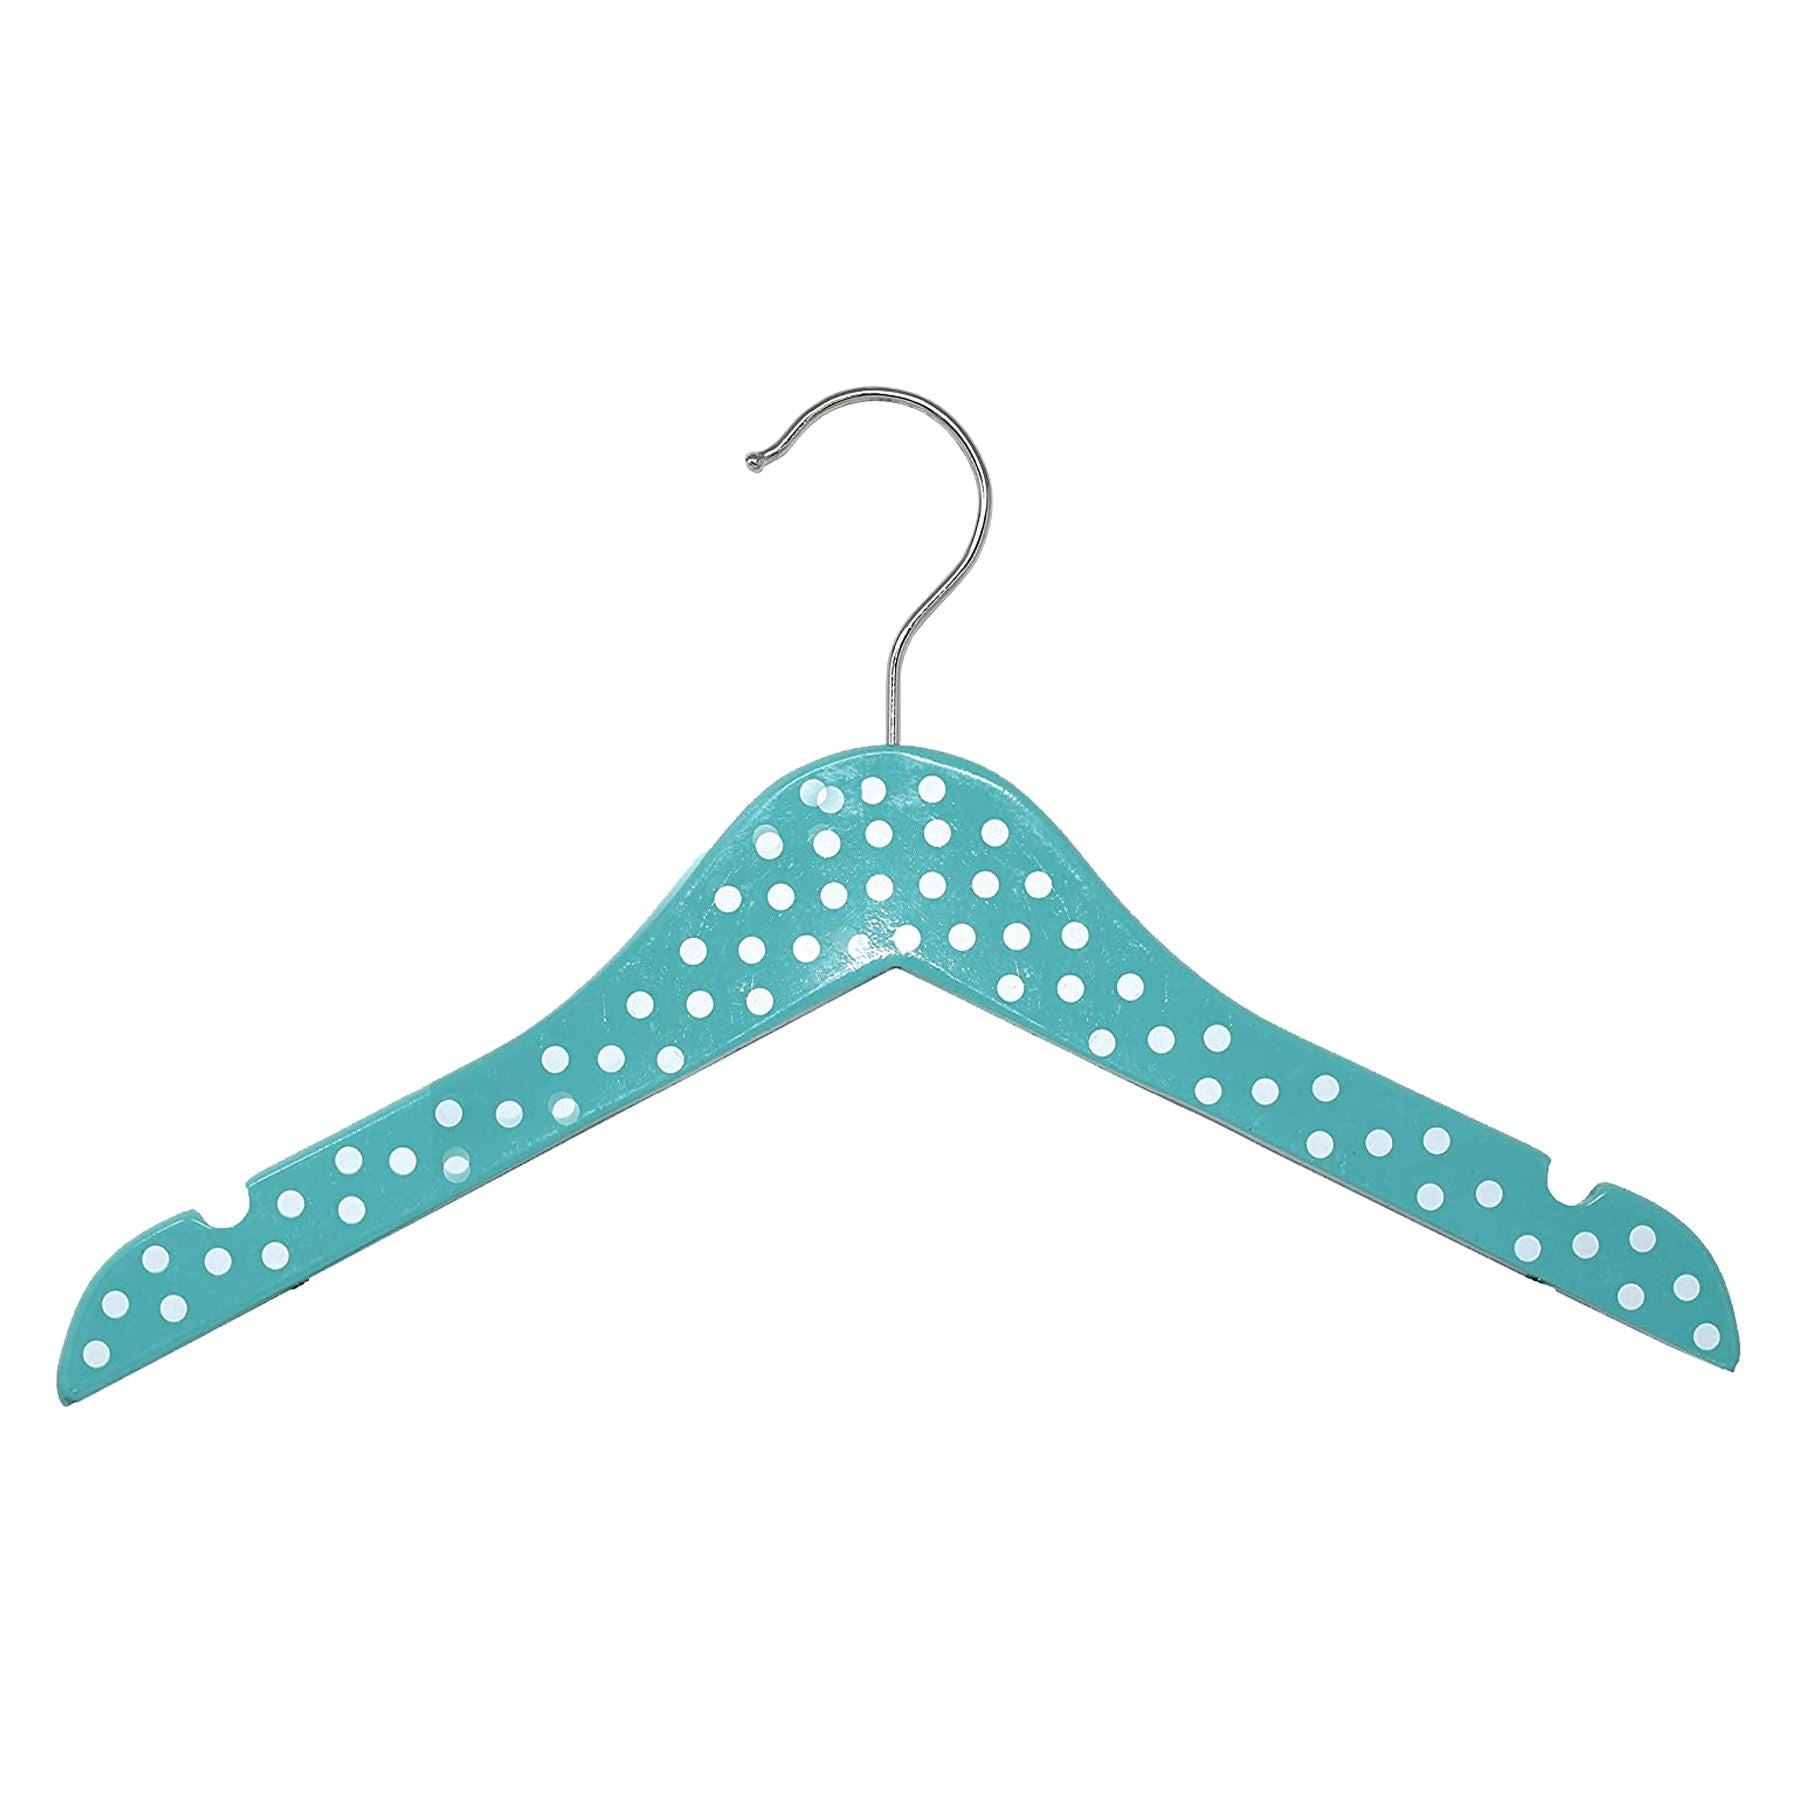 Children's Wooden Clothes Hangers Hangers Craftworks NW Turquoise 1-Side None